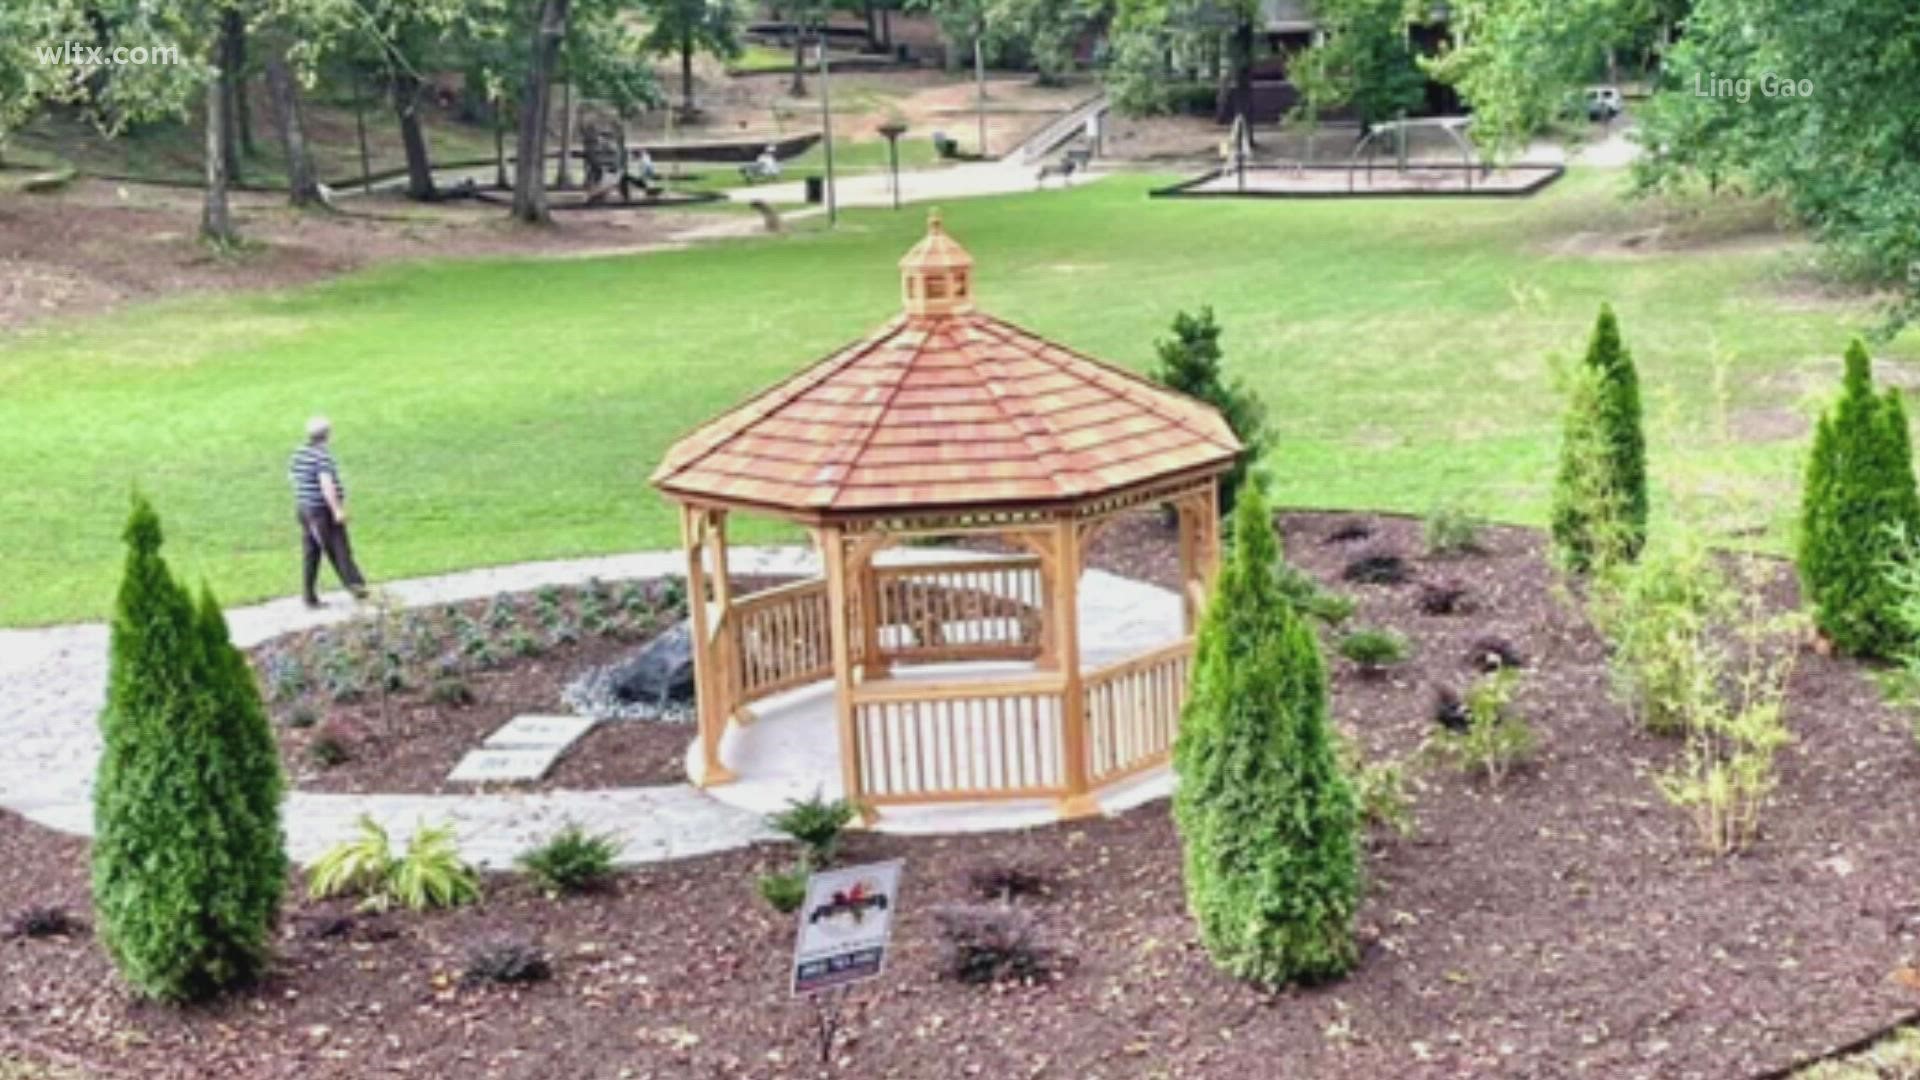 The Tao Gao Meditation Garden is now open. It was built in memory of Tao Gao, a former Shandon resident who died in 2018.